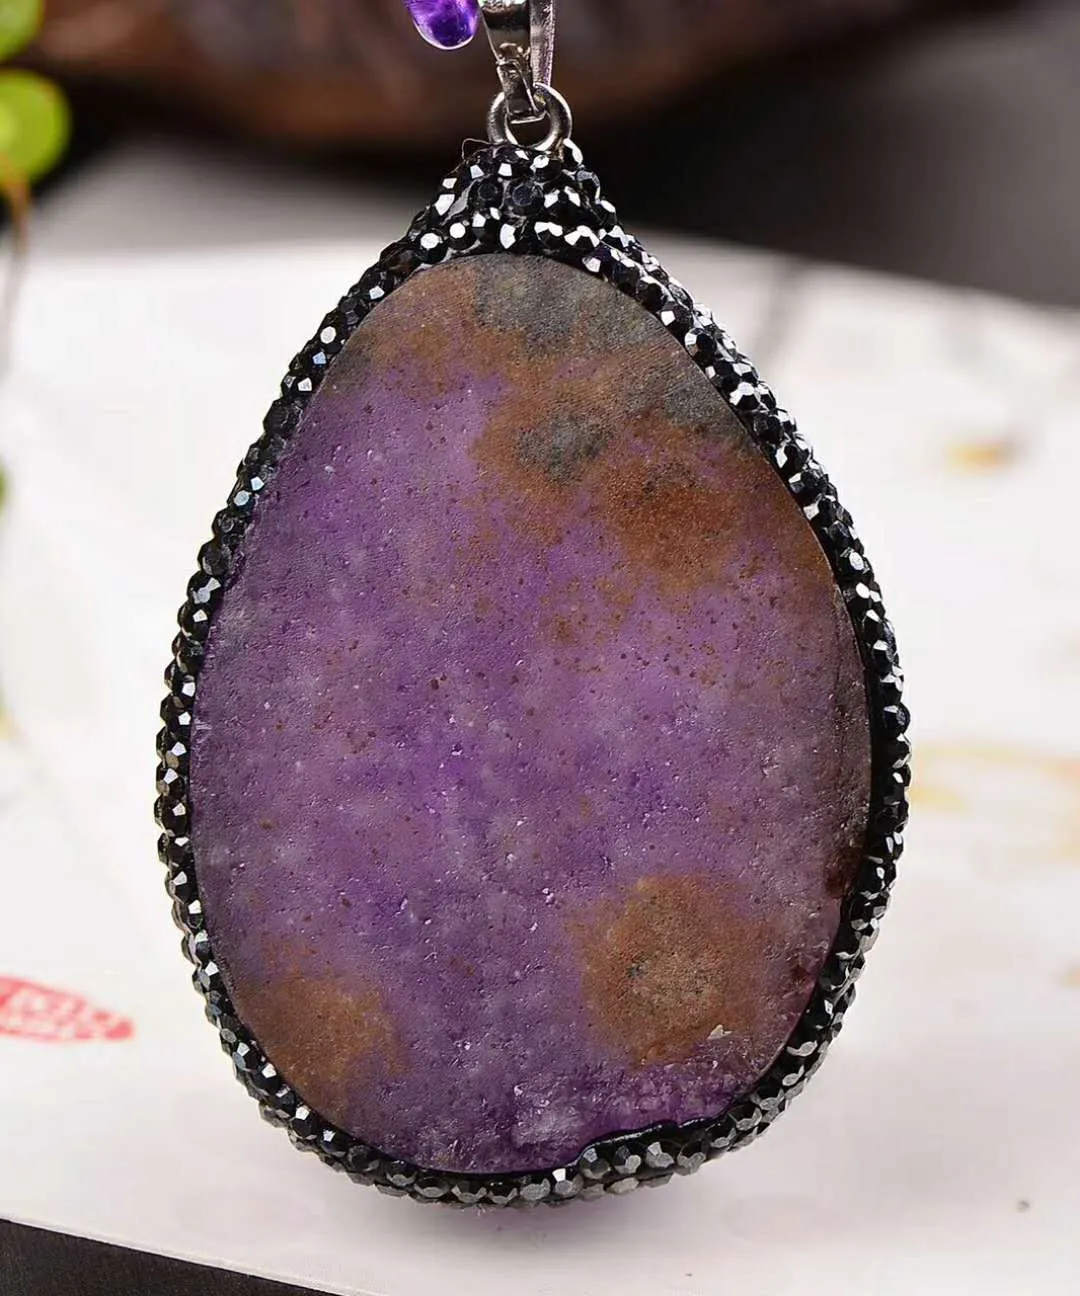 lovely beautiful Natural amethyst cluster pendant agate crystal necklace special crystal haling crystal giftcolor purple6887154